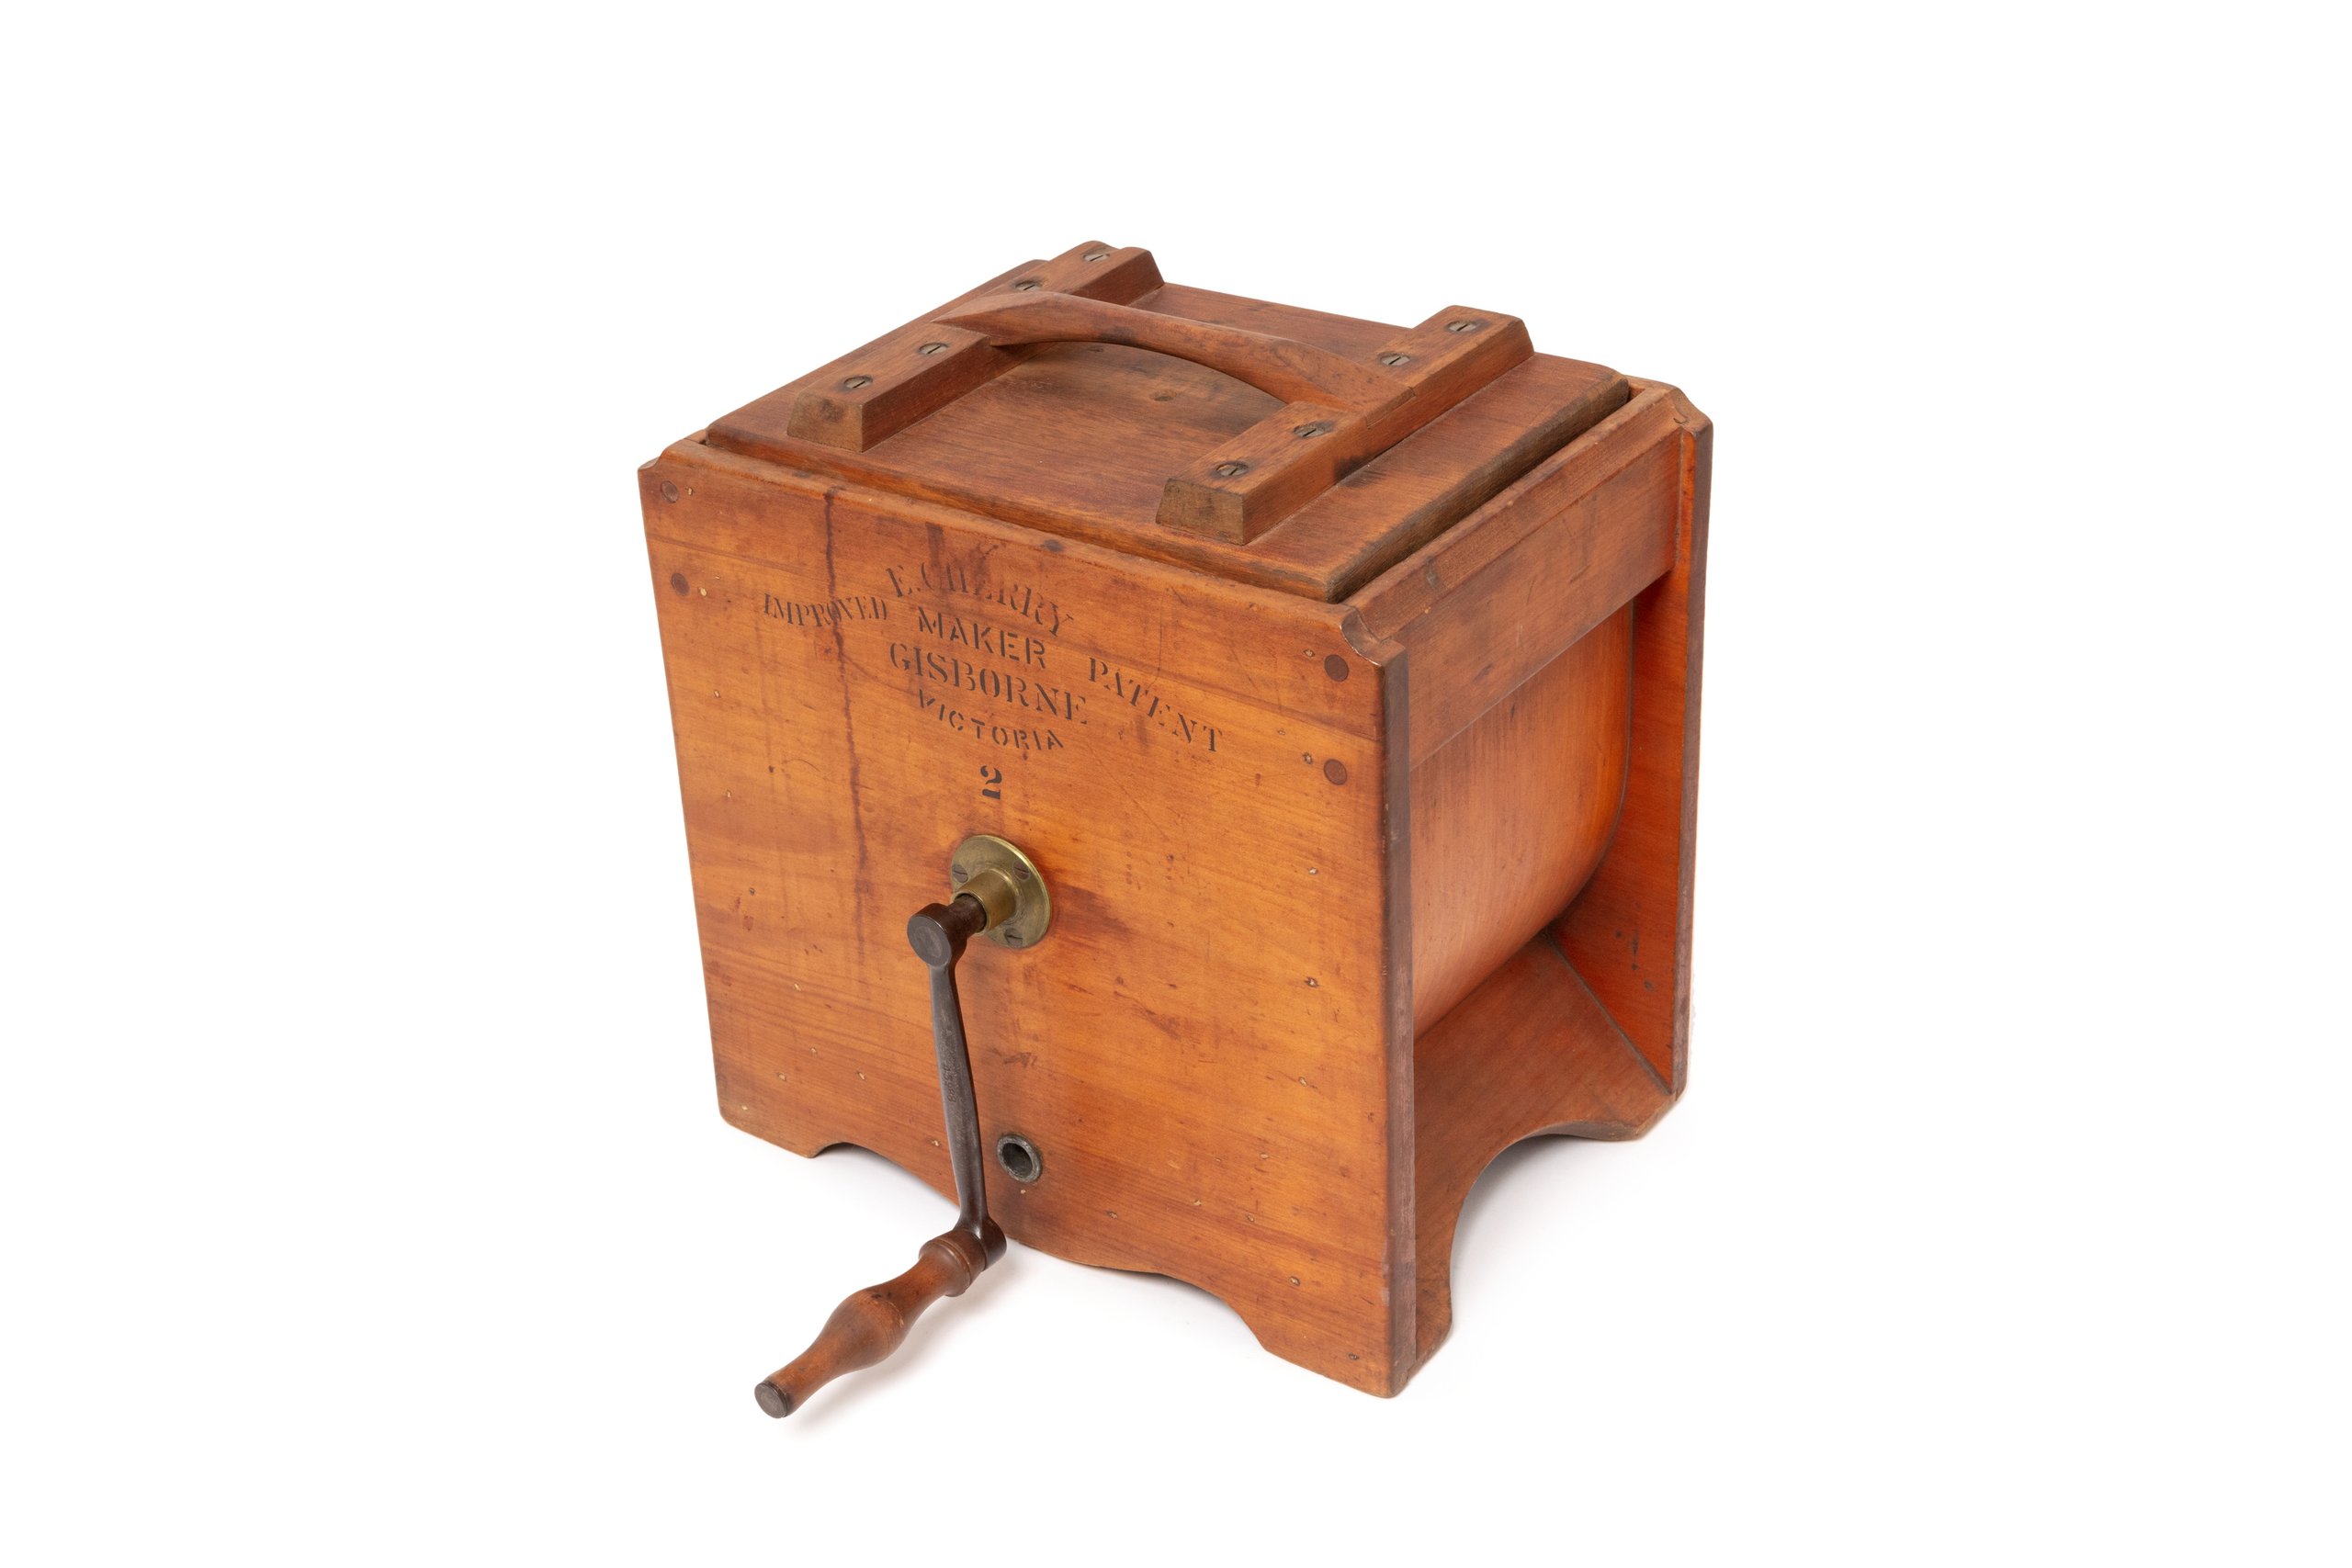 Butter churn made by E Cherry & Sons